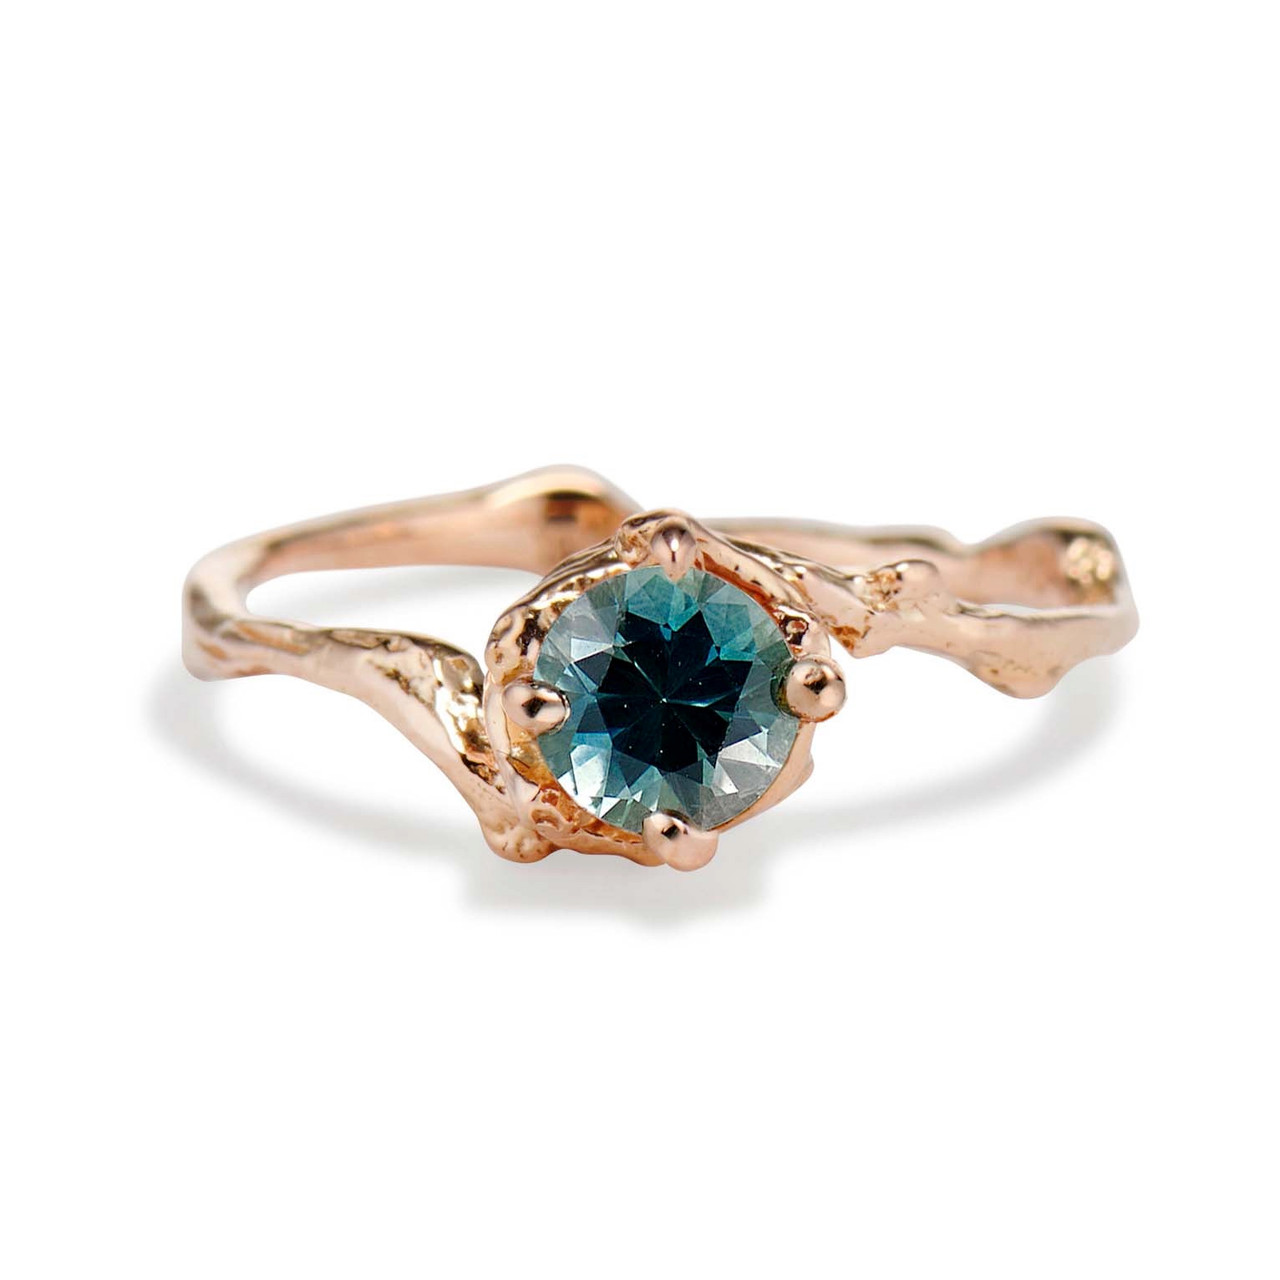 Naples Teal Sapphire Solitaire Engagement Ring | Olivia Ewing